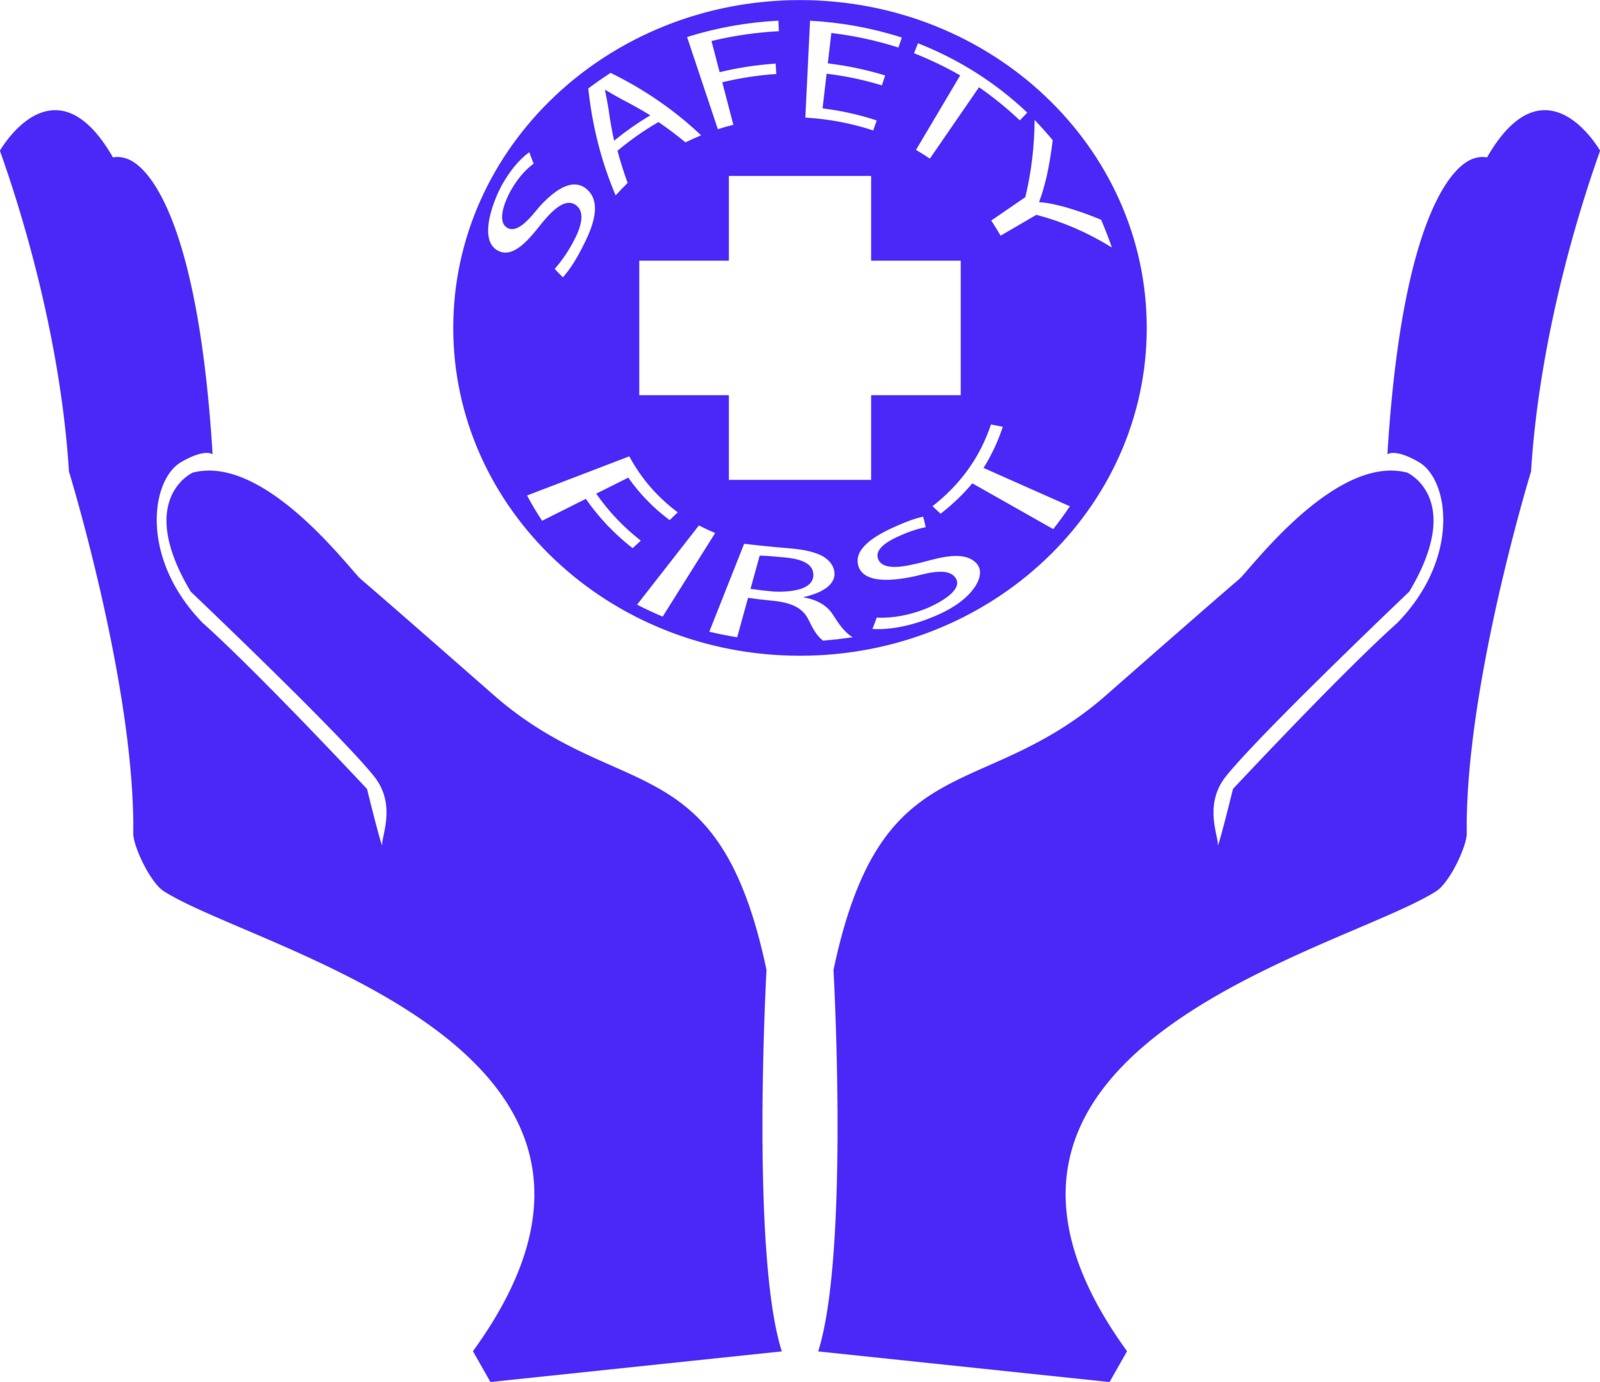 safety first, the logo for Environmental Health Safety,Vector illustration